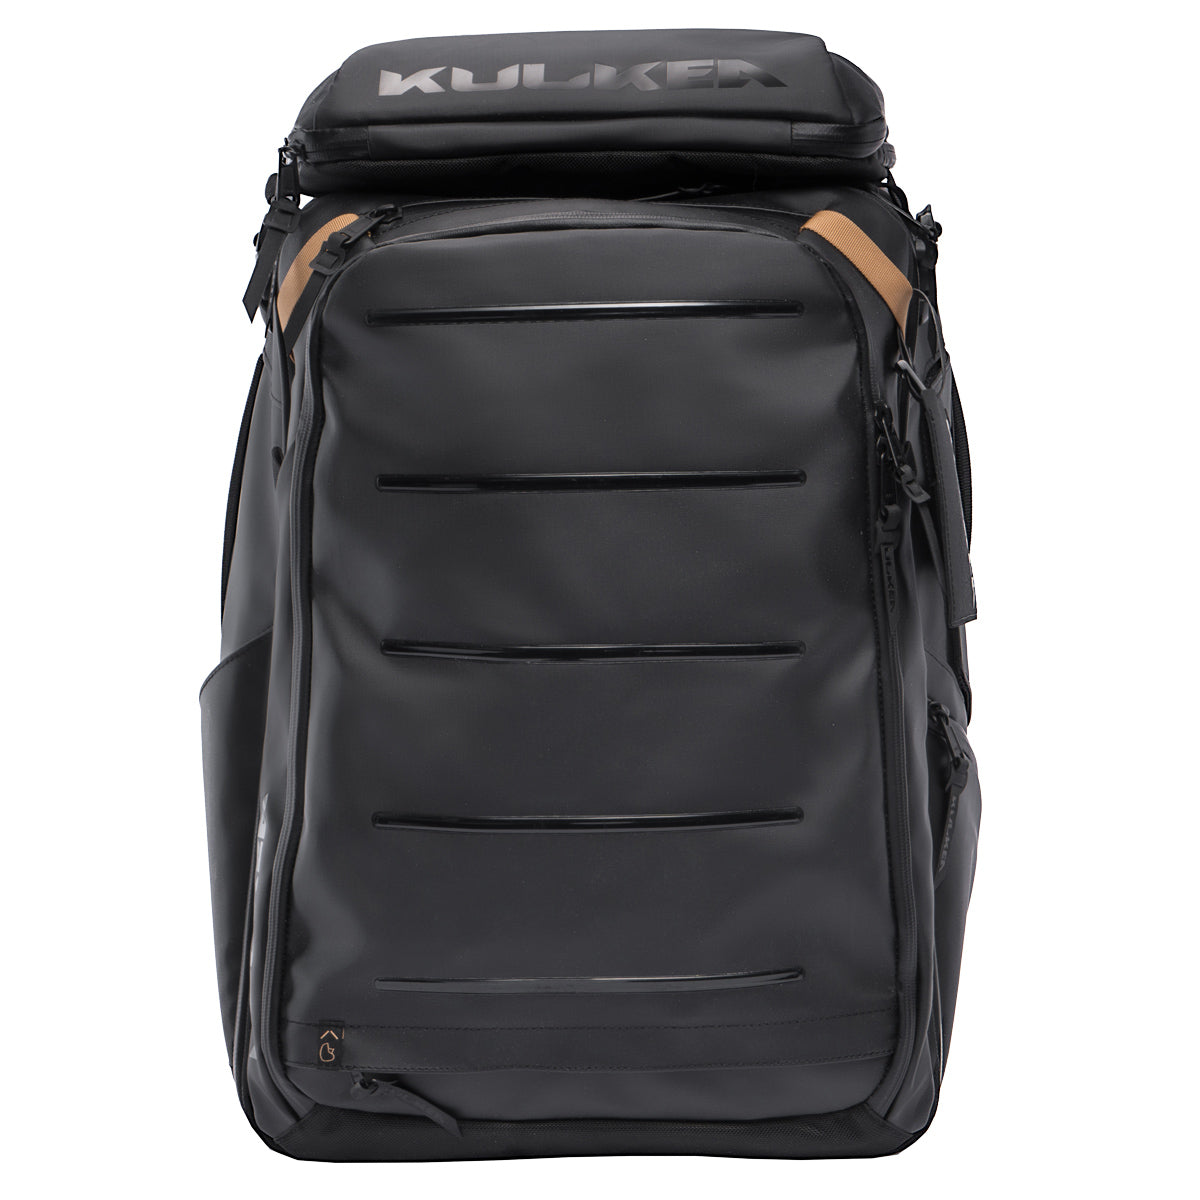 Kulkea travel backpack, all black with tons of compartments. Shoulder straps. Fits ski boots, laptop, and more.